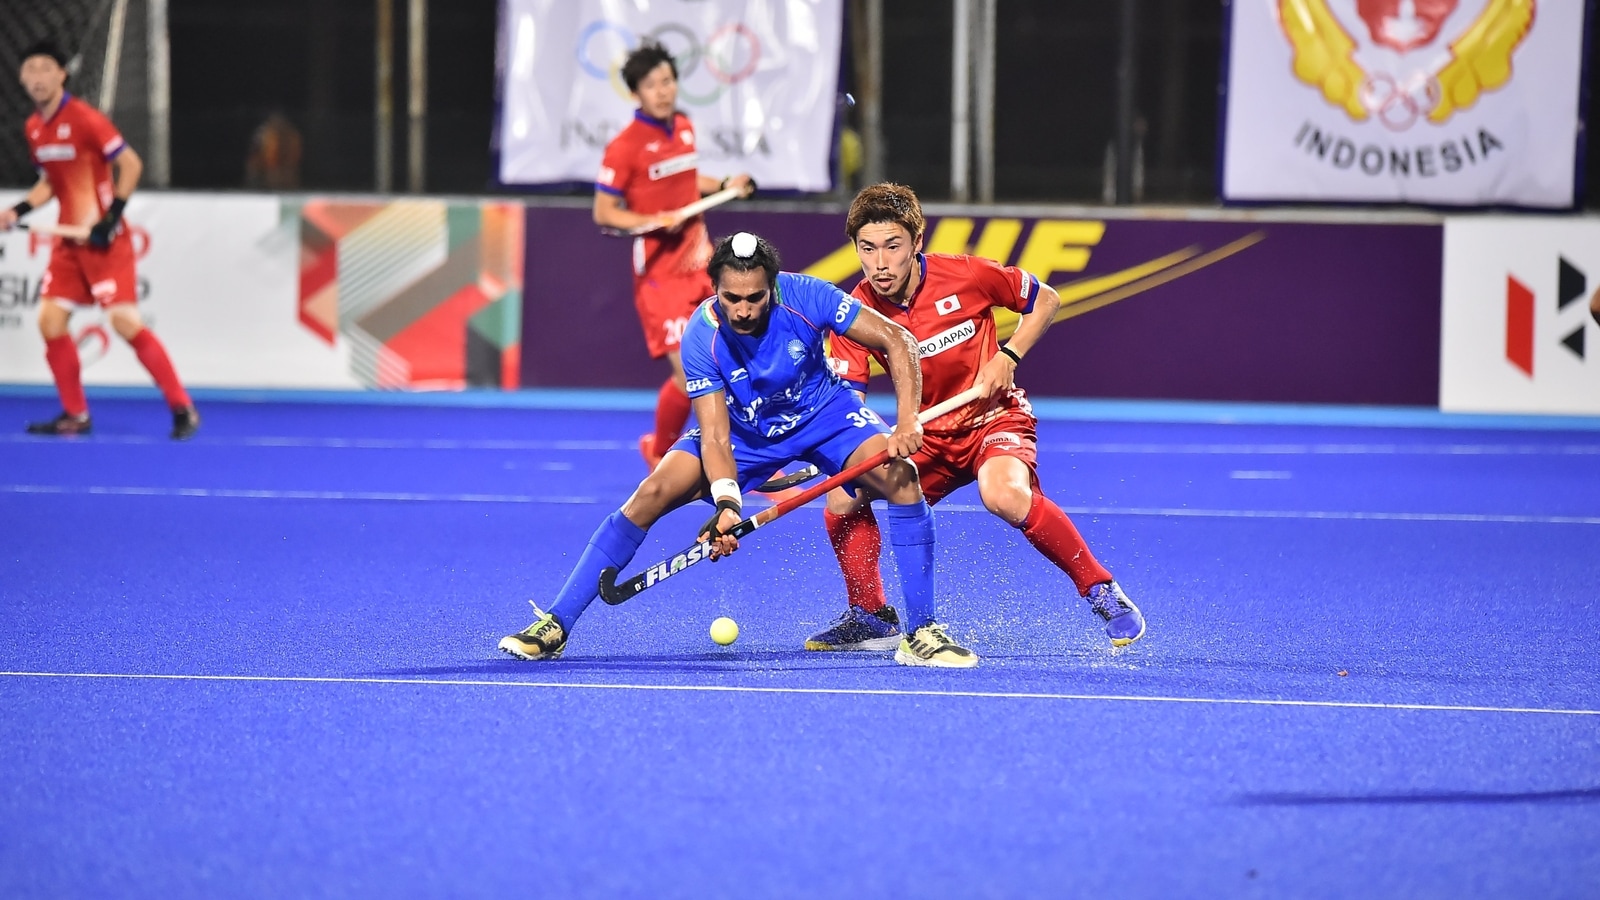 India vs Japan Highlights Asia Cup 2022 Manjeet, Pawan score as India beat Japan 2-1 in Super 4s match Hindustan Times